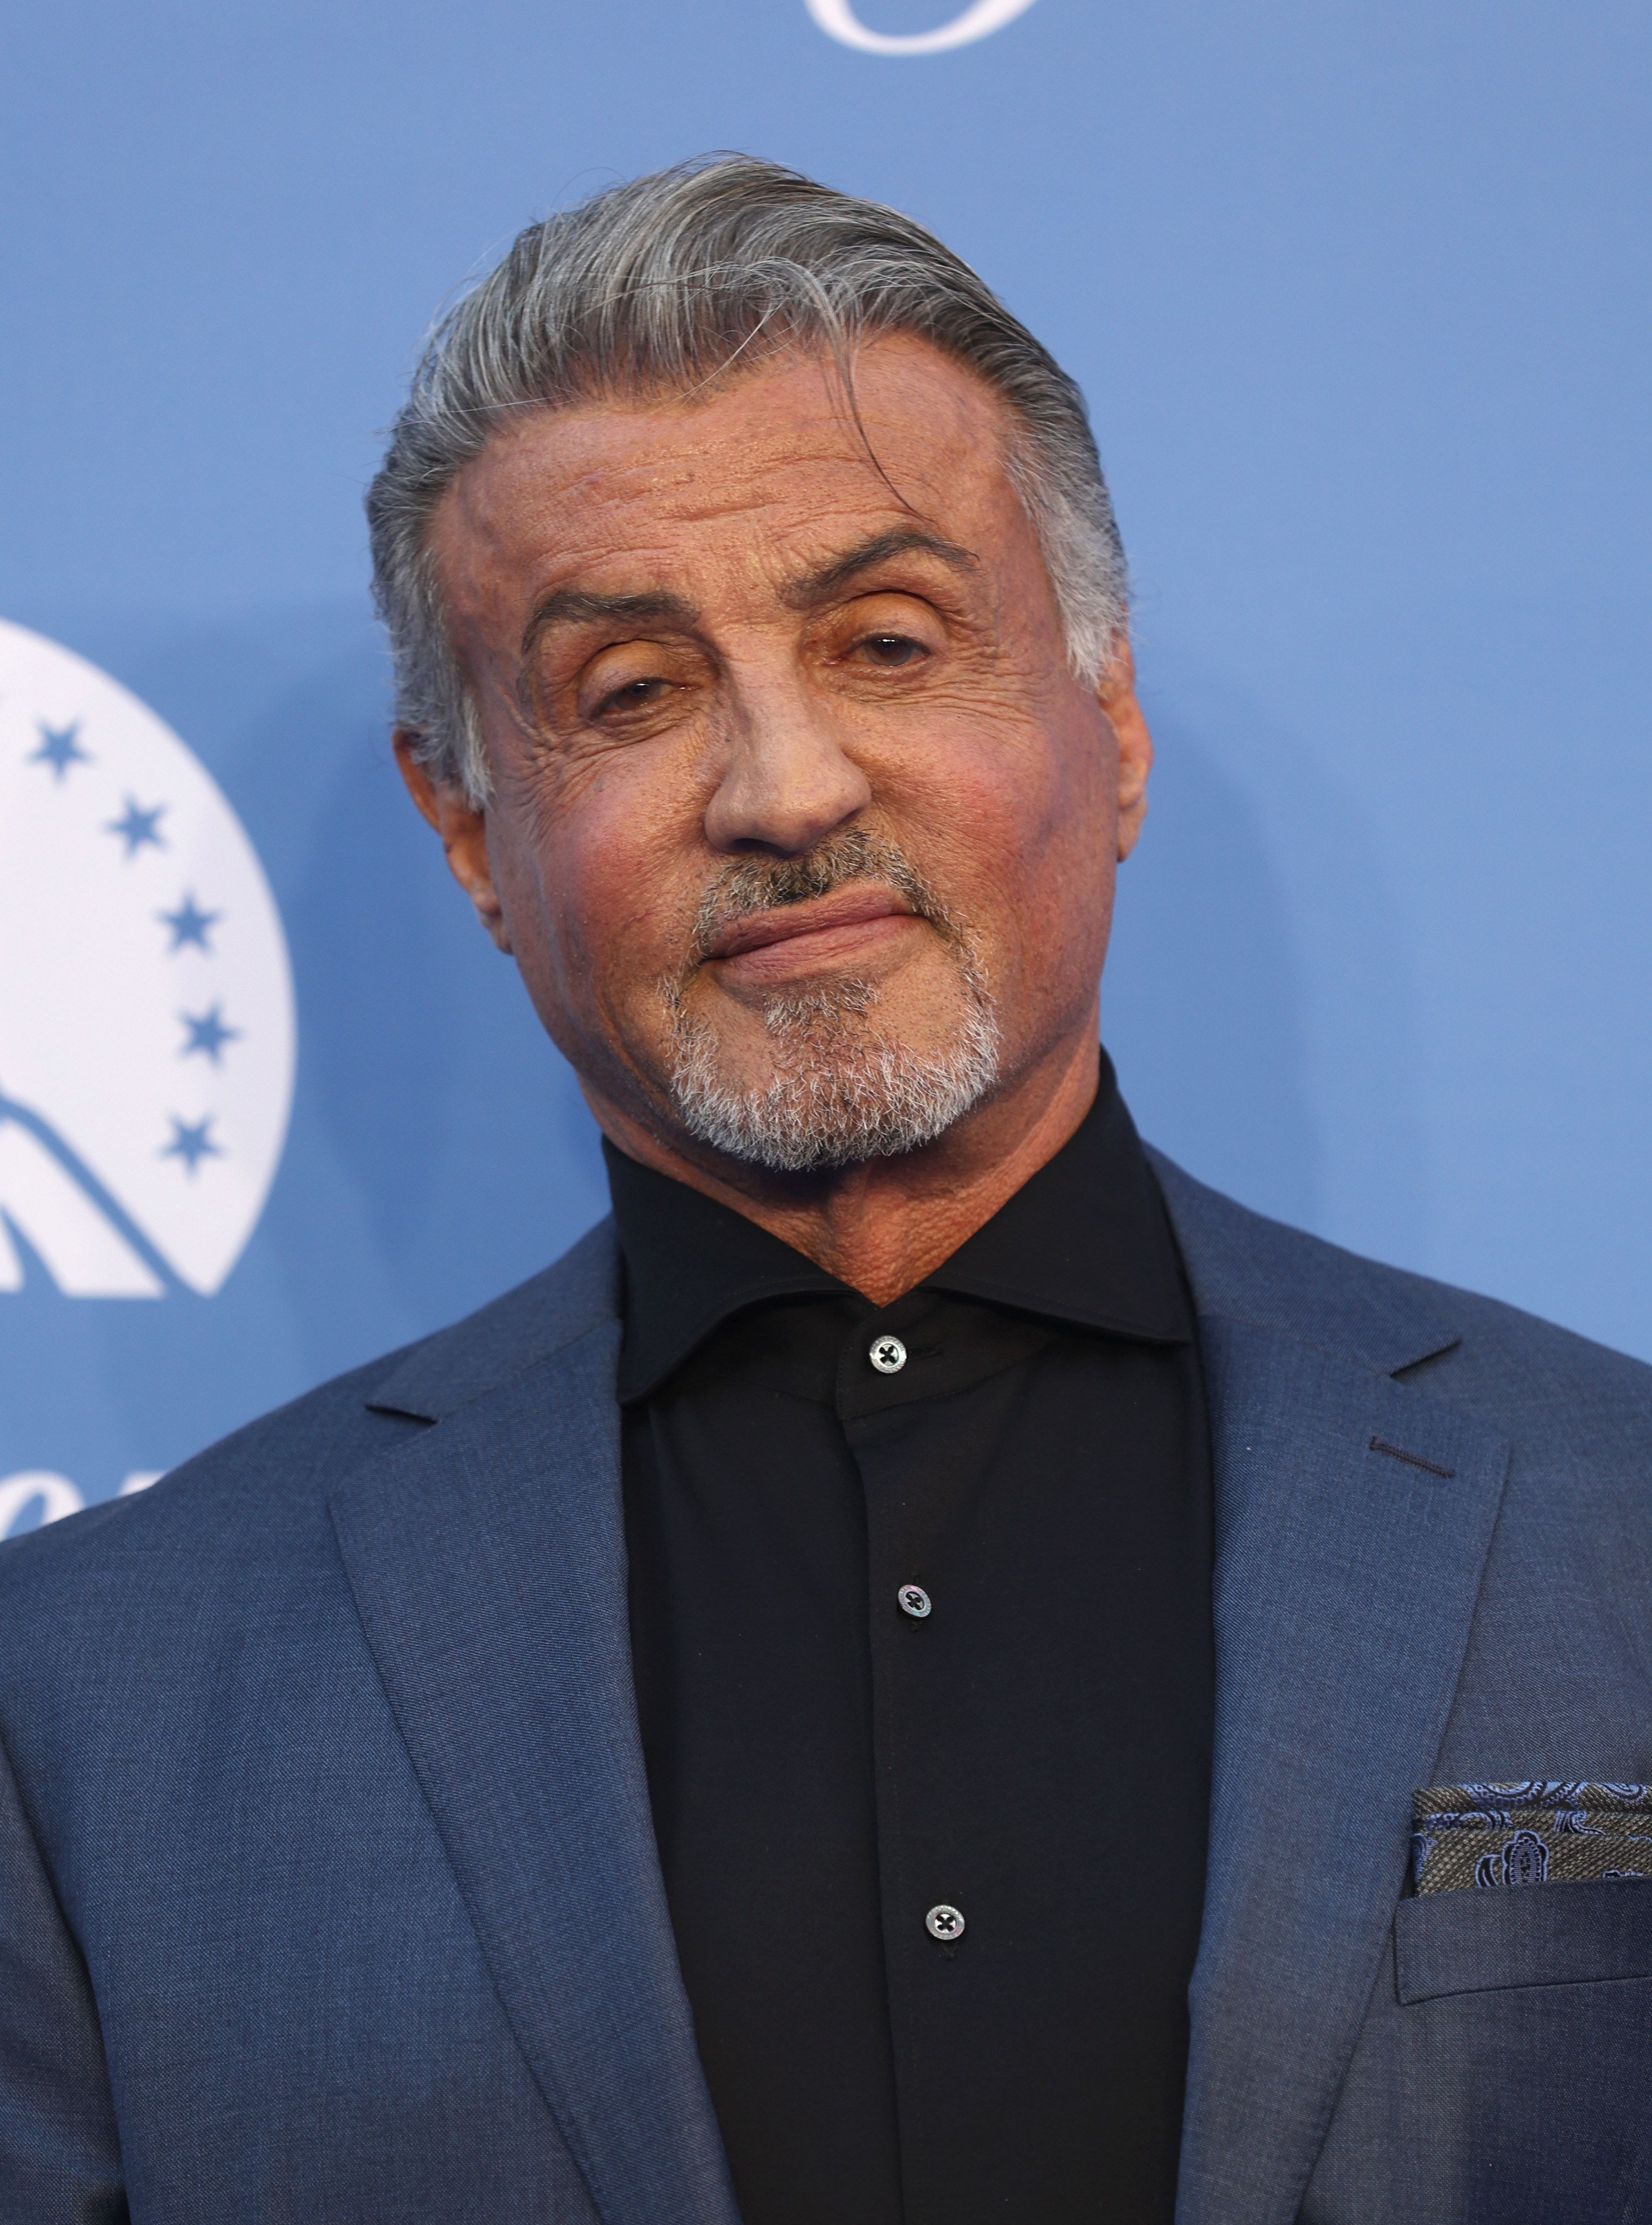 Sylvester Stallone poses at the Paramount+ UK launch in London on June 20, 2022